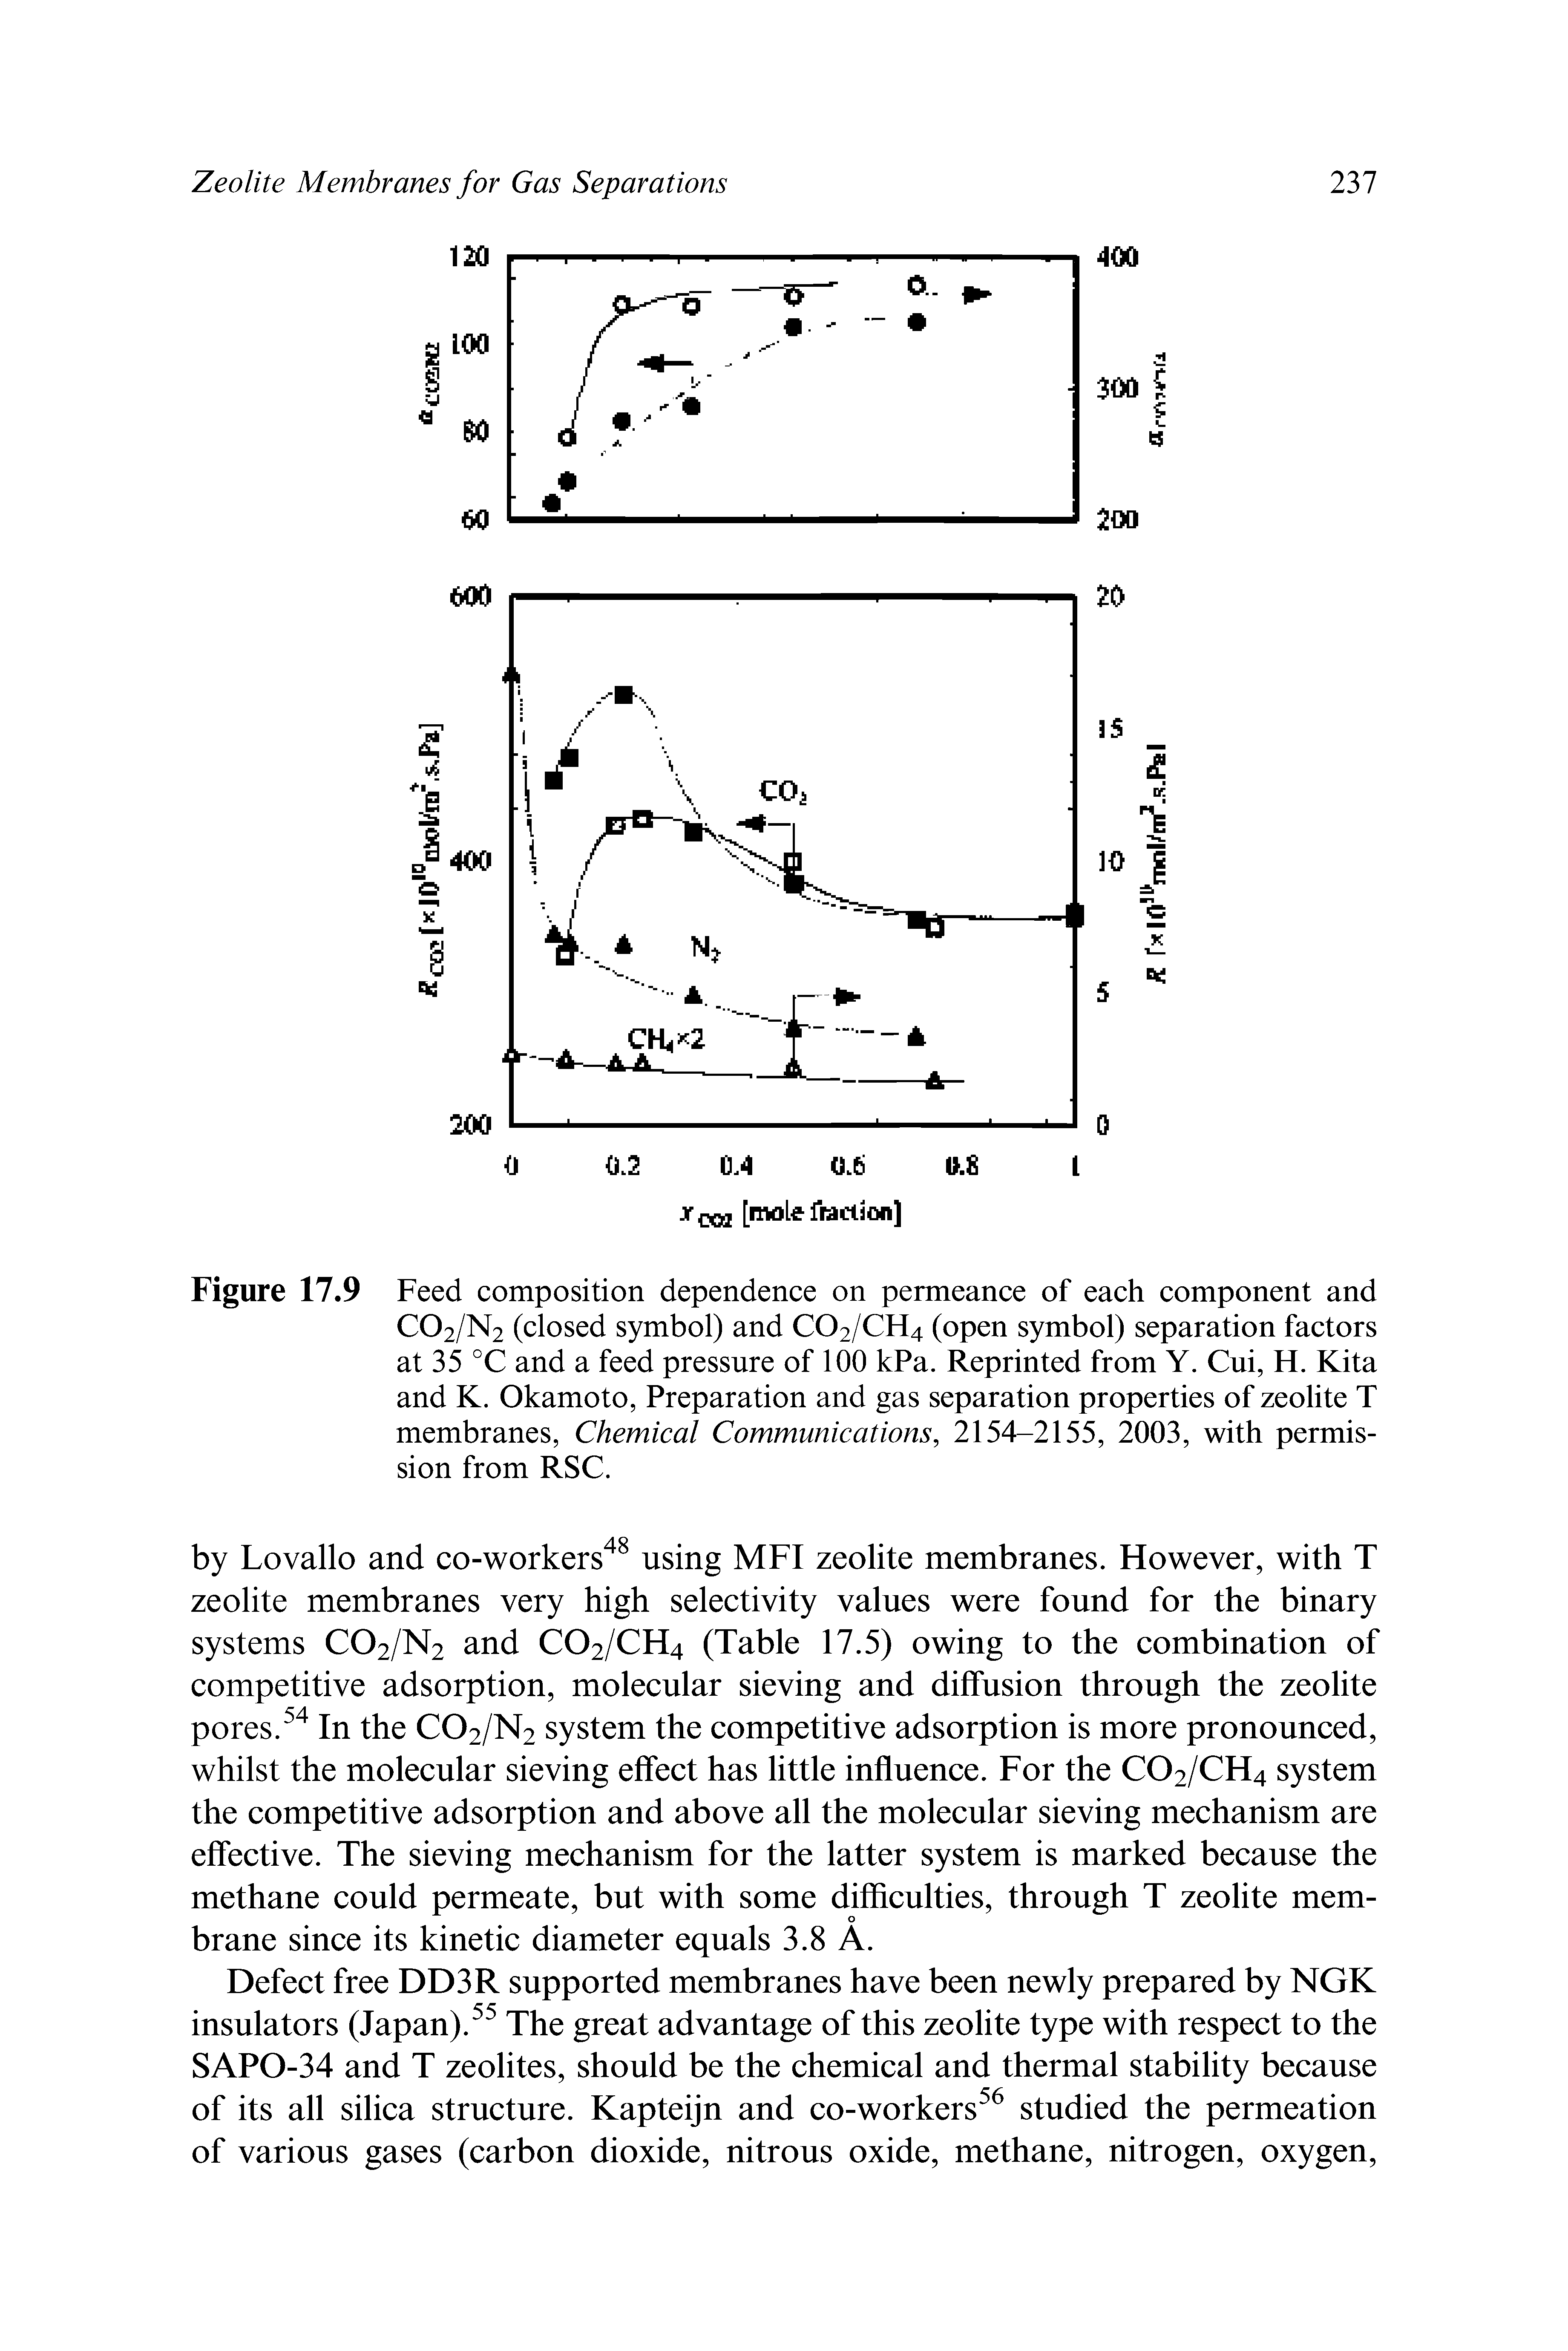 Figure 17.9 Feed composition dependence on permeance of each component and CO2/N2 (closed symbol) and CO2/CH4 (open symbol) separation factors at 35 °C and a feed pressure of 100 kPa. Reprinted from Y. Cui, H. Kita and K. Okamoto, Preparation and gas separation properties of zeolite T membranes, Chemical Communications, 2154—2155, 2003, with permission from RSC.